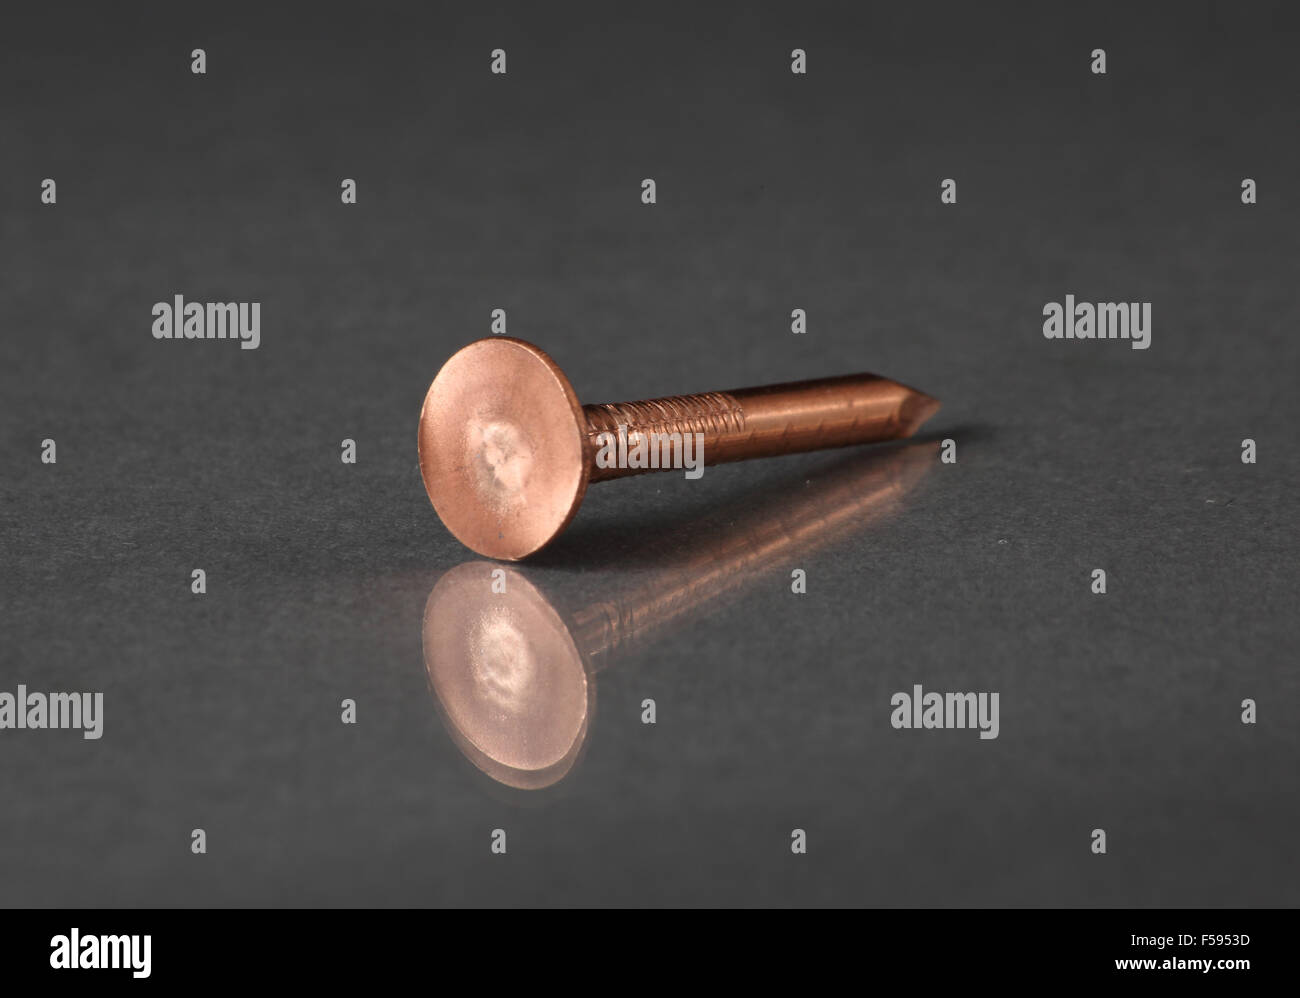 A single copper roofing nail shown on a plain reflective background. Copper nails are used for slate roofing Stock Photo